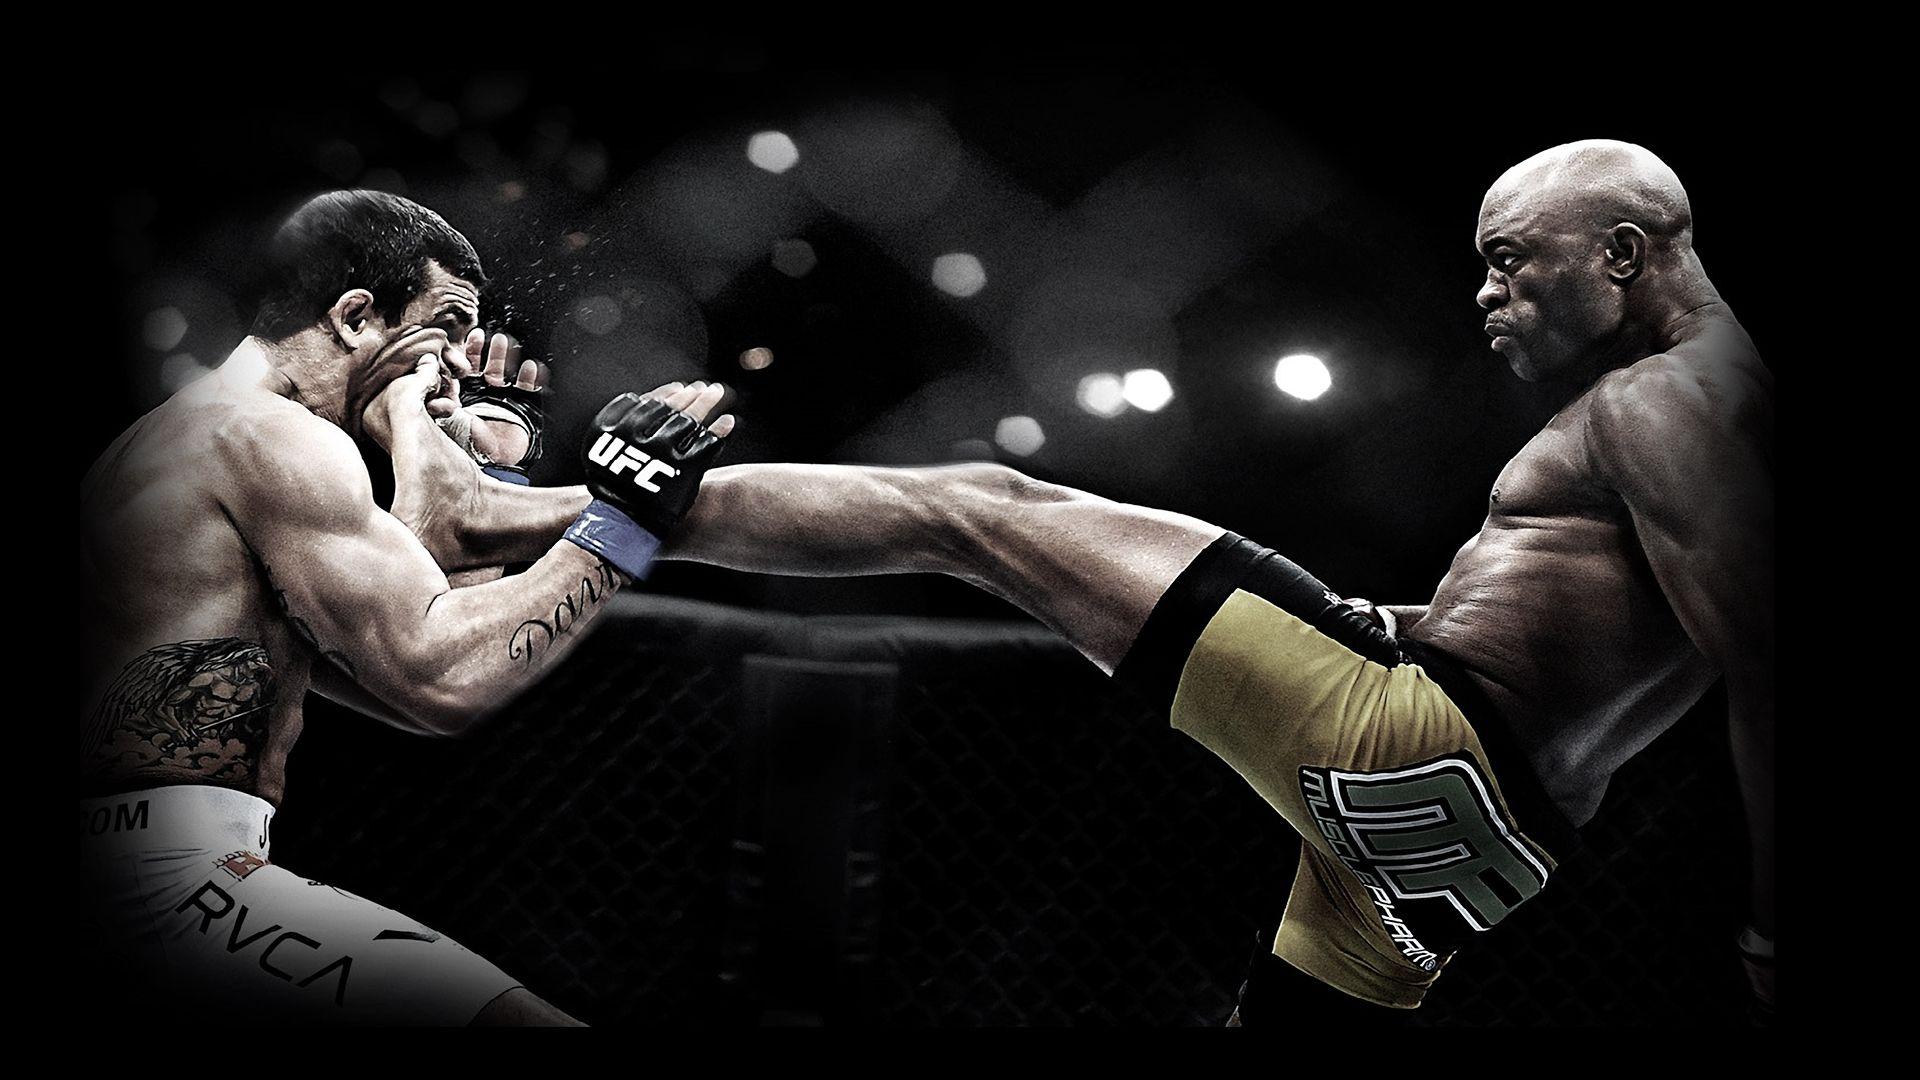 Mma Fighter Wallpapers - Wallpaper Cave